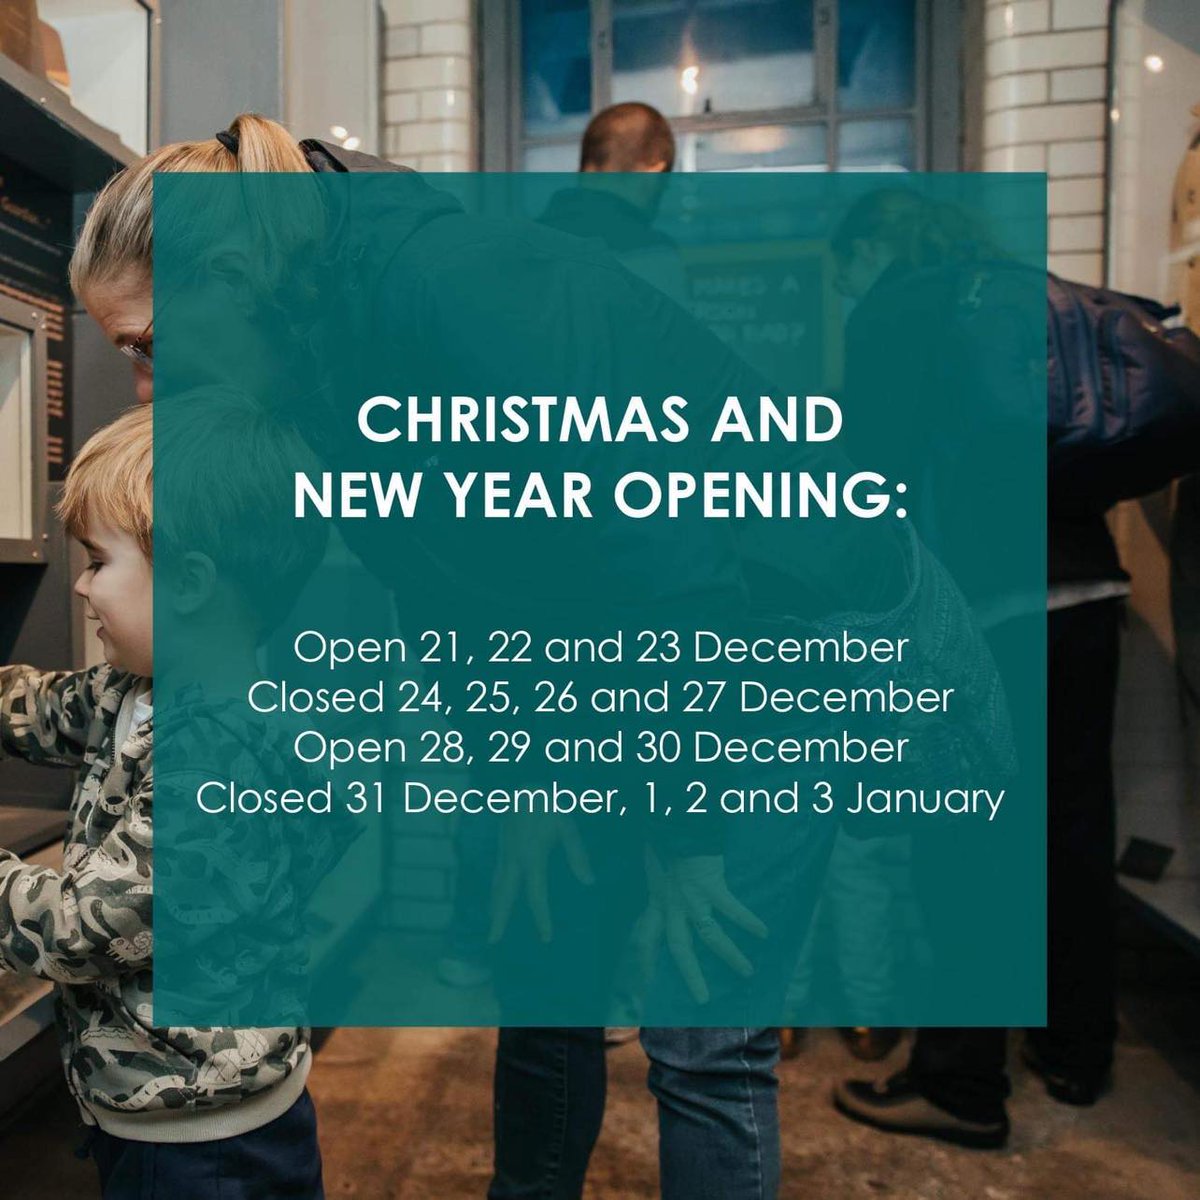 Check out our Christmas & New Year opening below. The good news is you've still got time to squeeze in a visit to the UK's best #FamilyFriendlyMuseum before 2023. The bad news is #TeamNESM is feeling festive so you'll have to deal with some very dodgy Christmas jumpers...